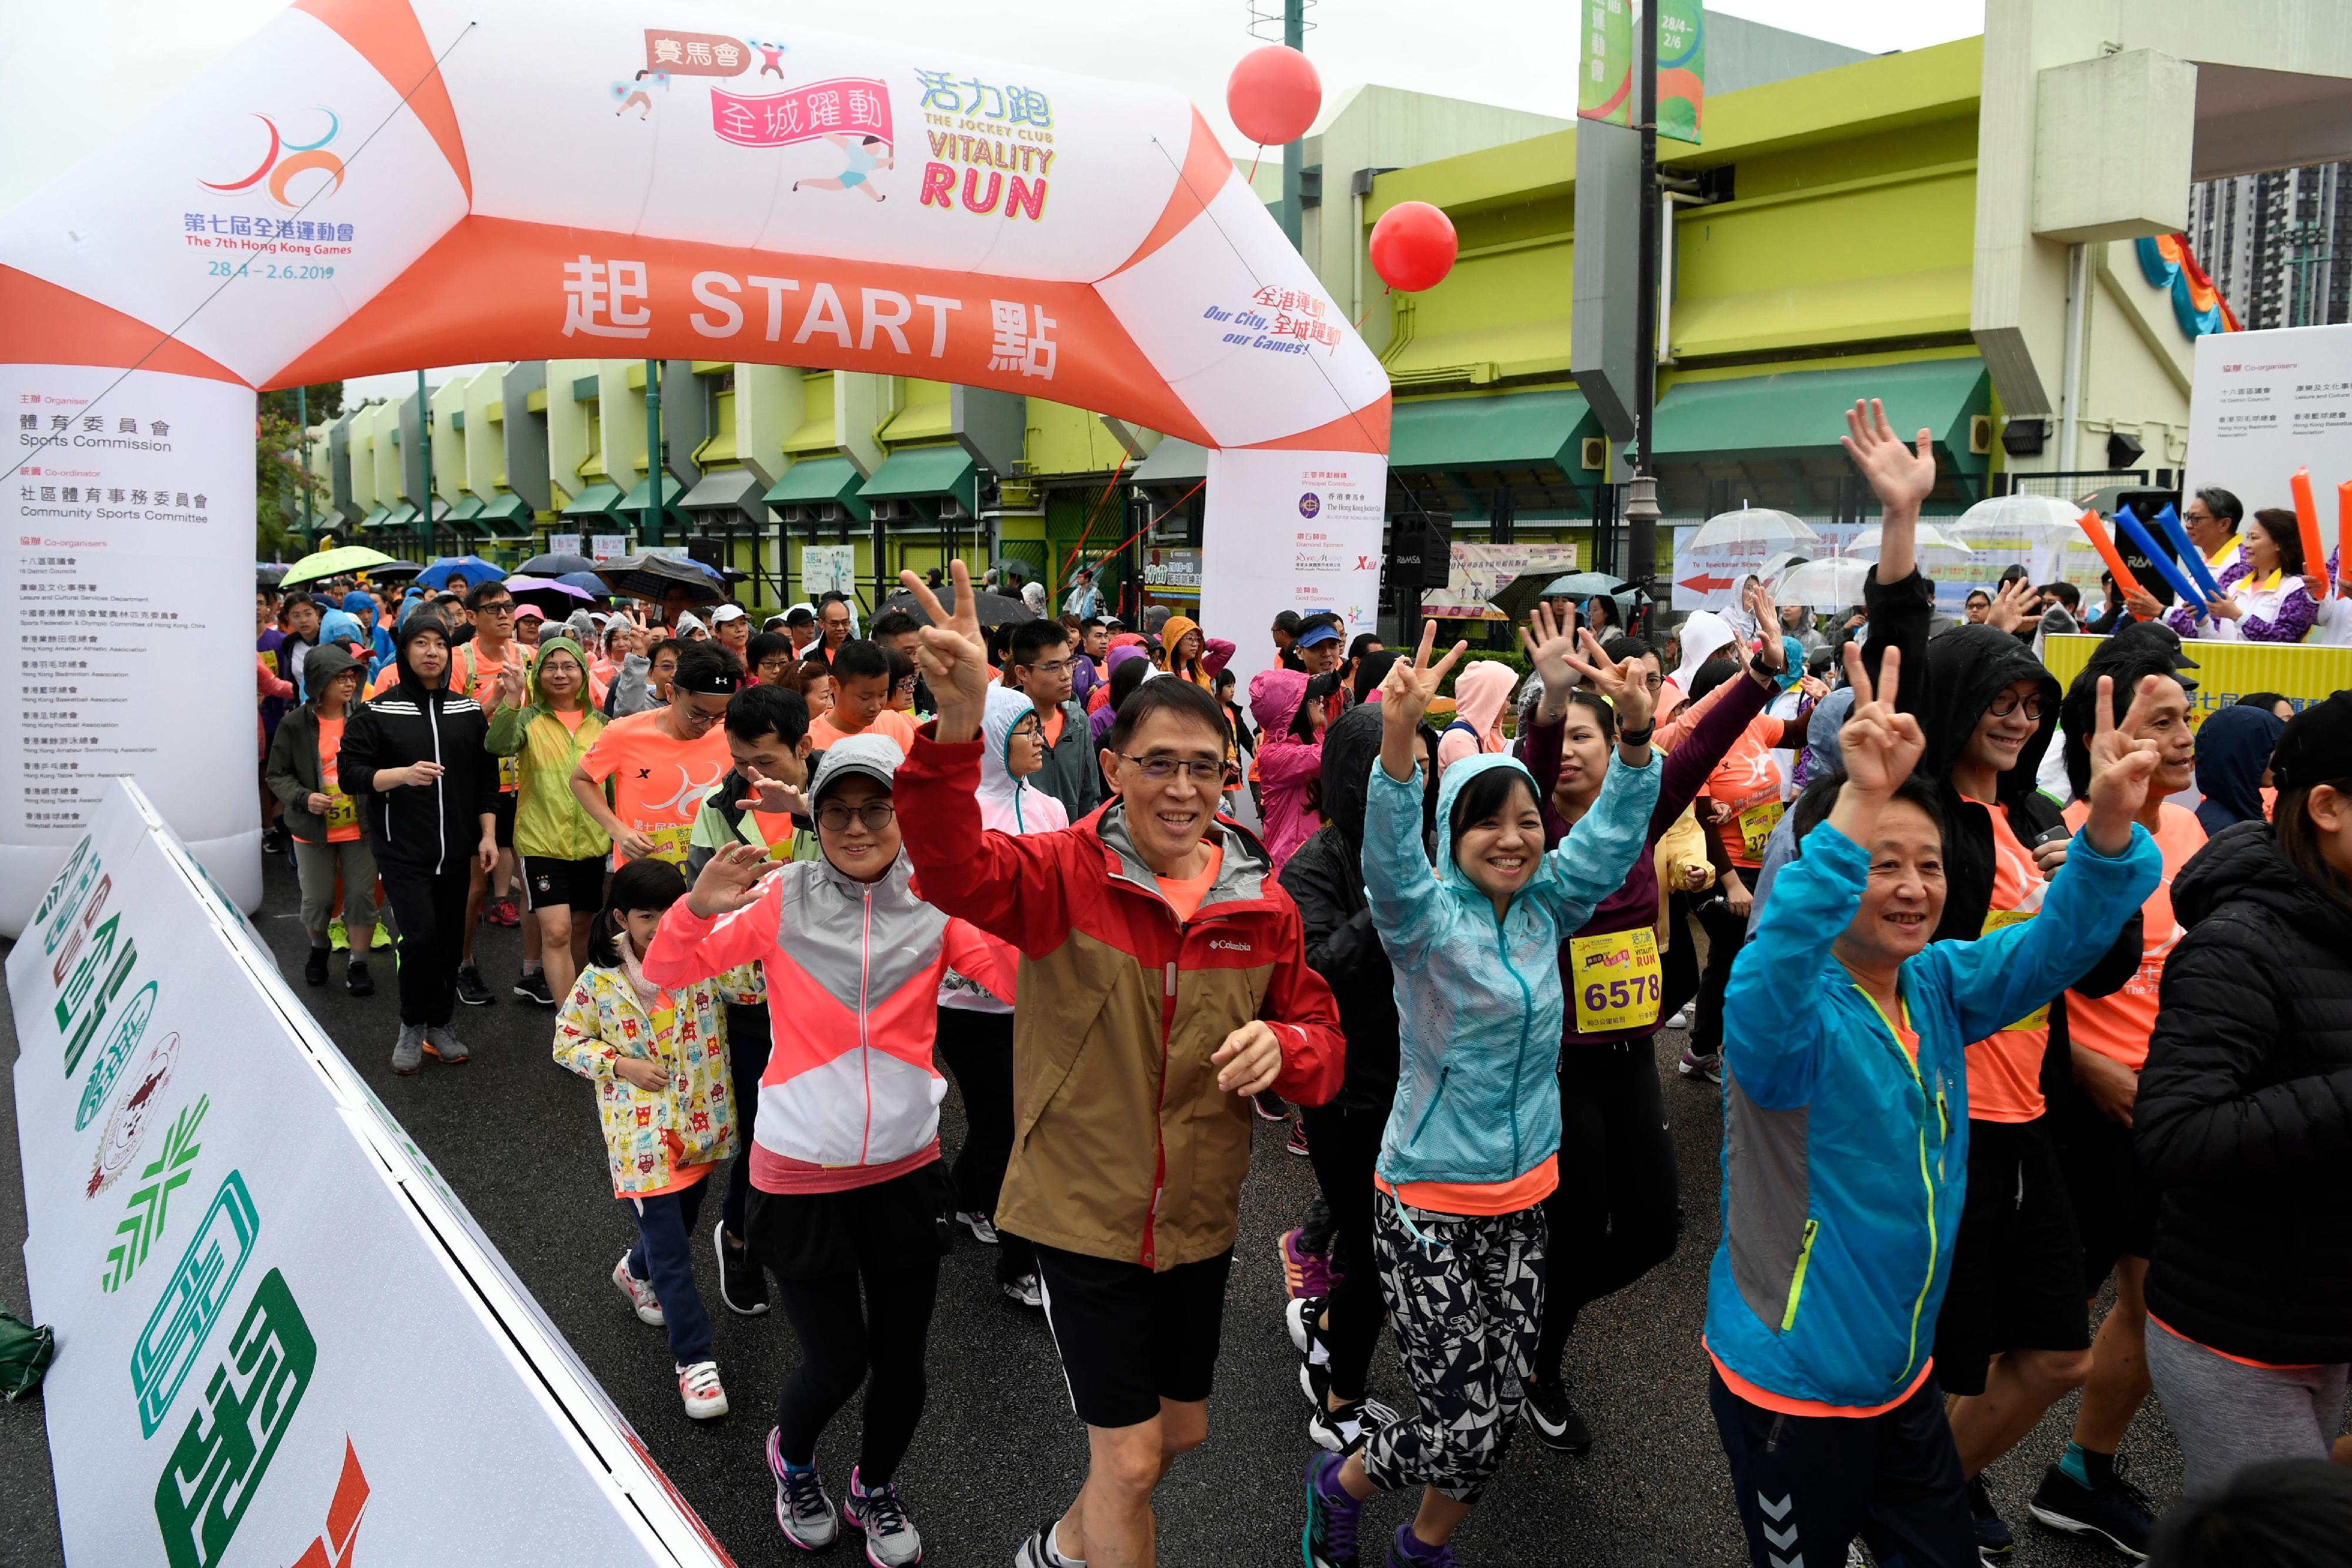 The 7th Hong Kong Games' Jockey Club Vitality Run was held alongside the Shing Mun River in Sha Tin in 2019, attracting over 5 000 members of the public to join.